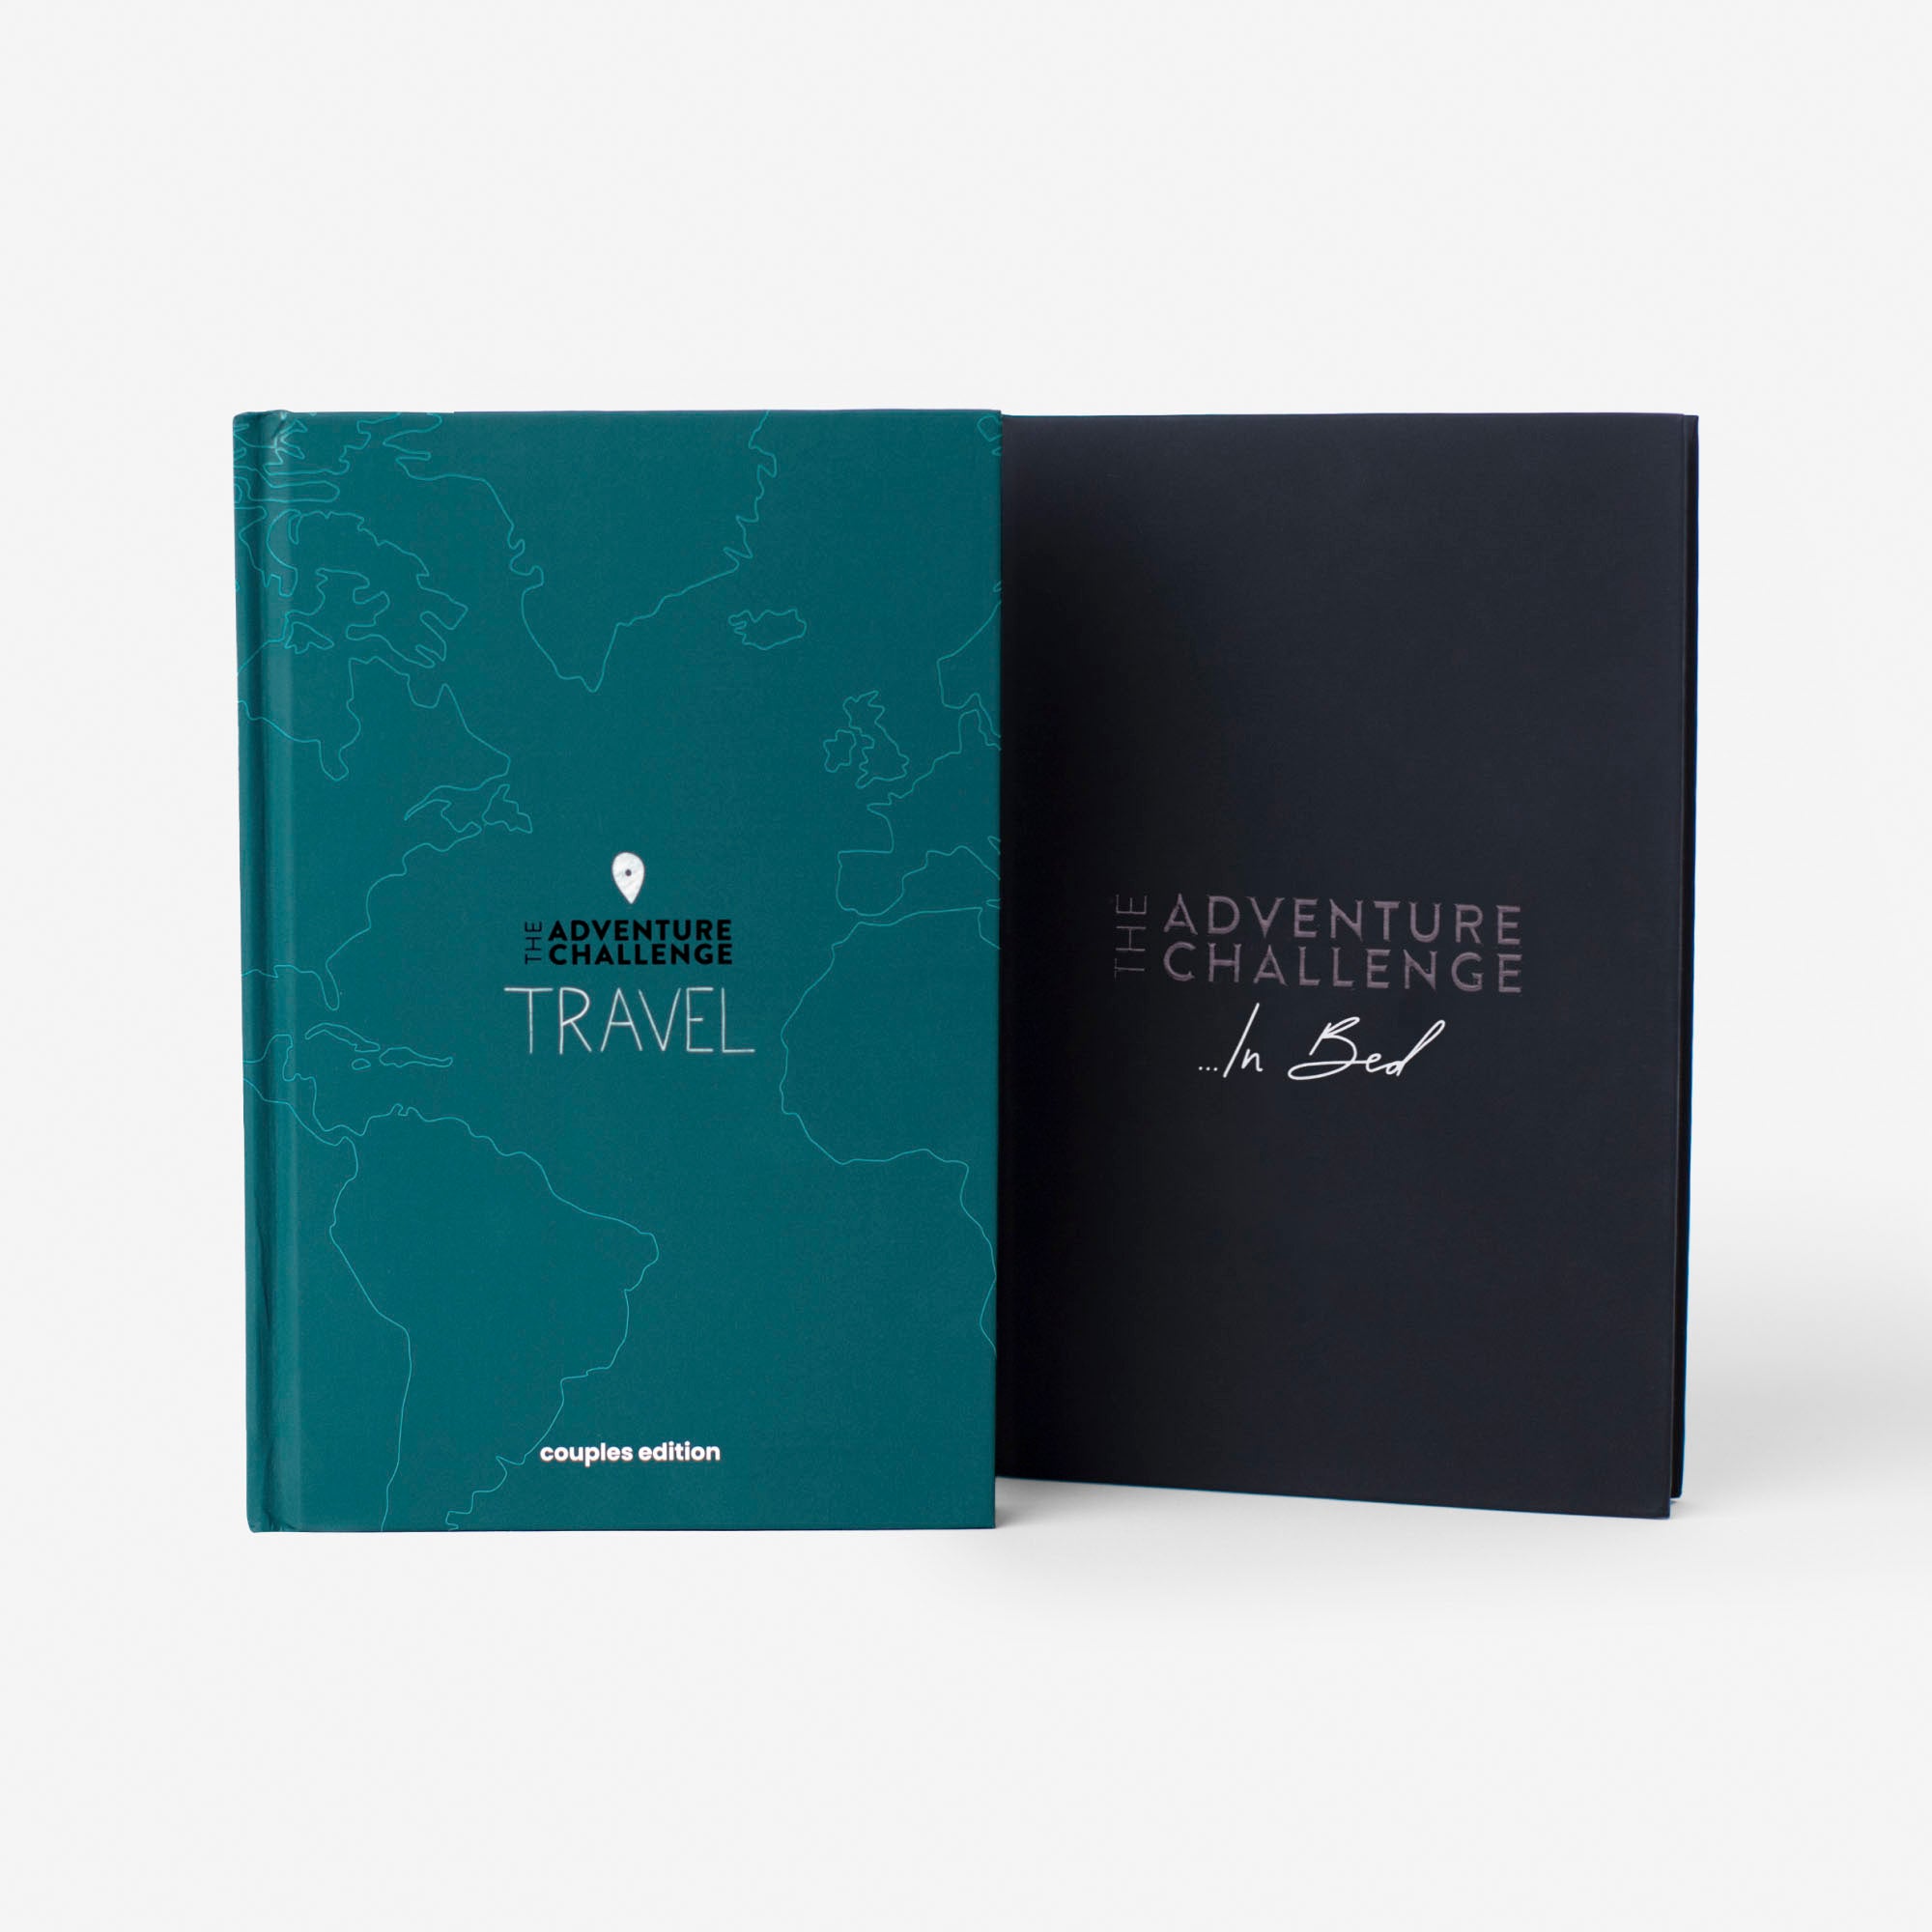 Travel and ...In Bed Bundle